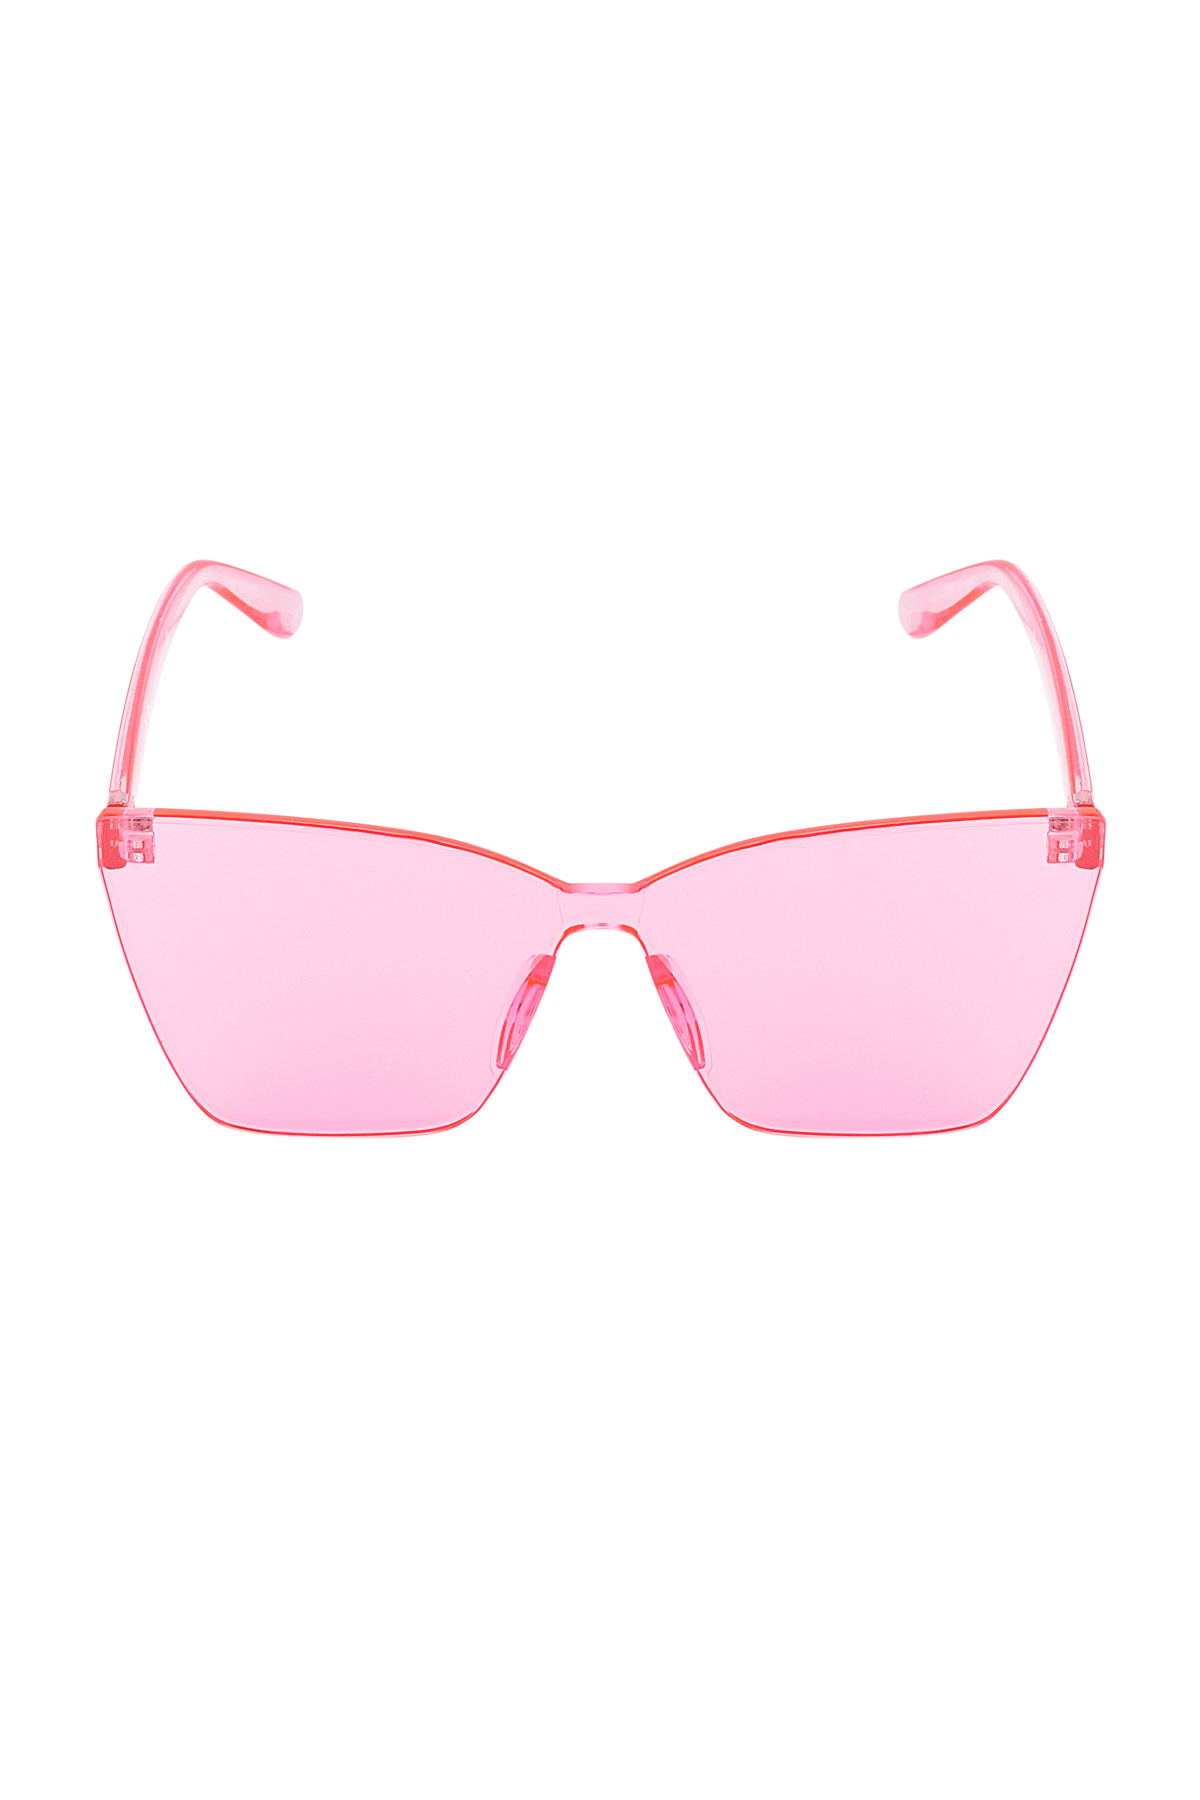 Single-color daily sunglasses - pink h5 Picture2